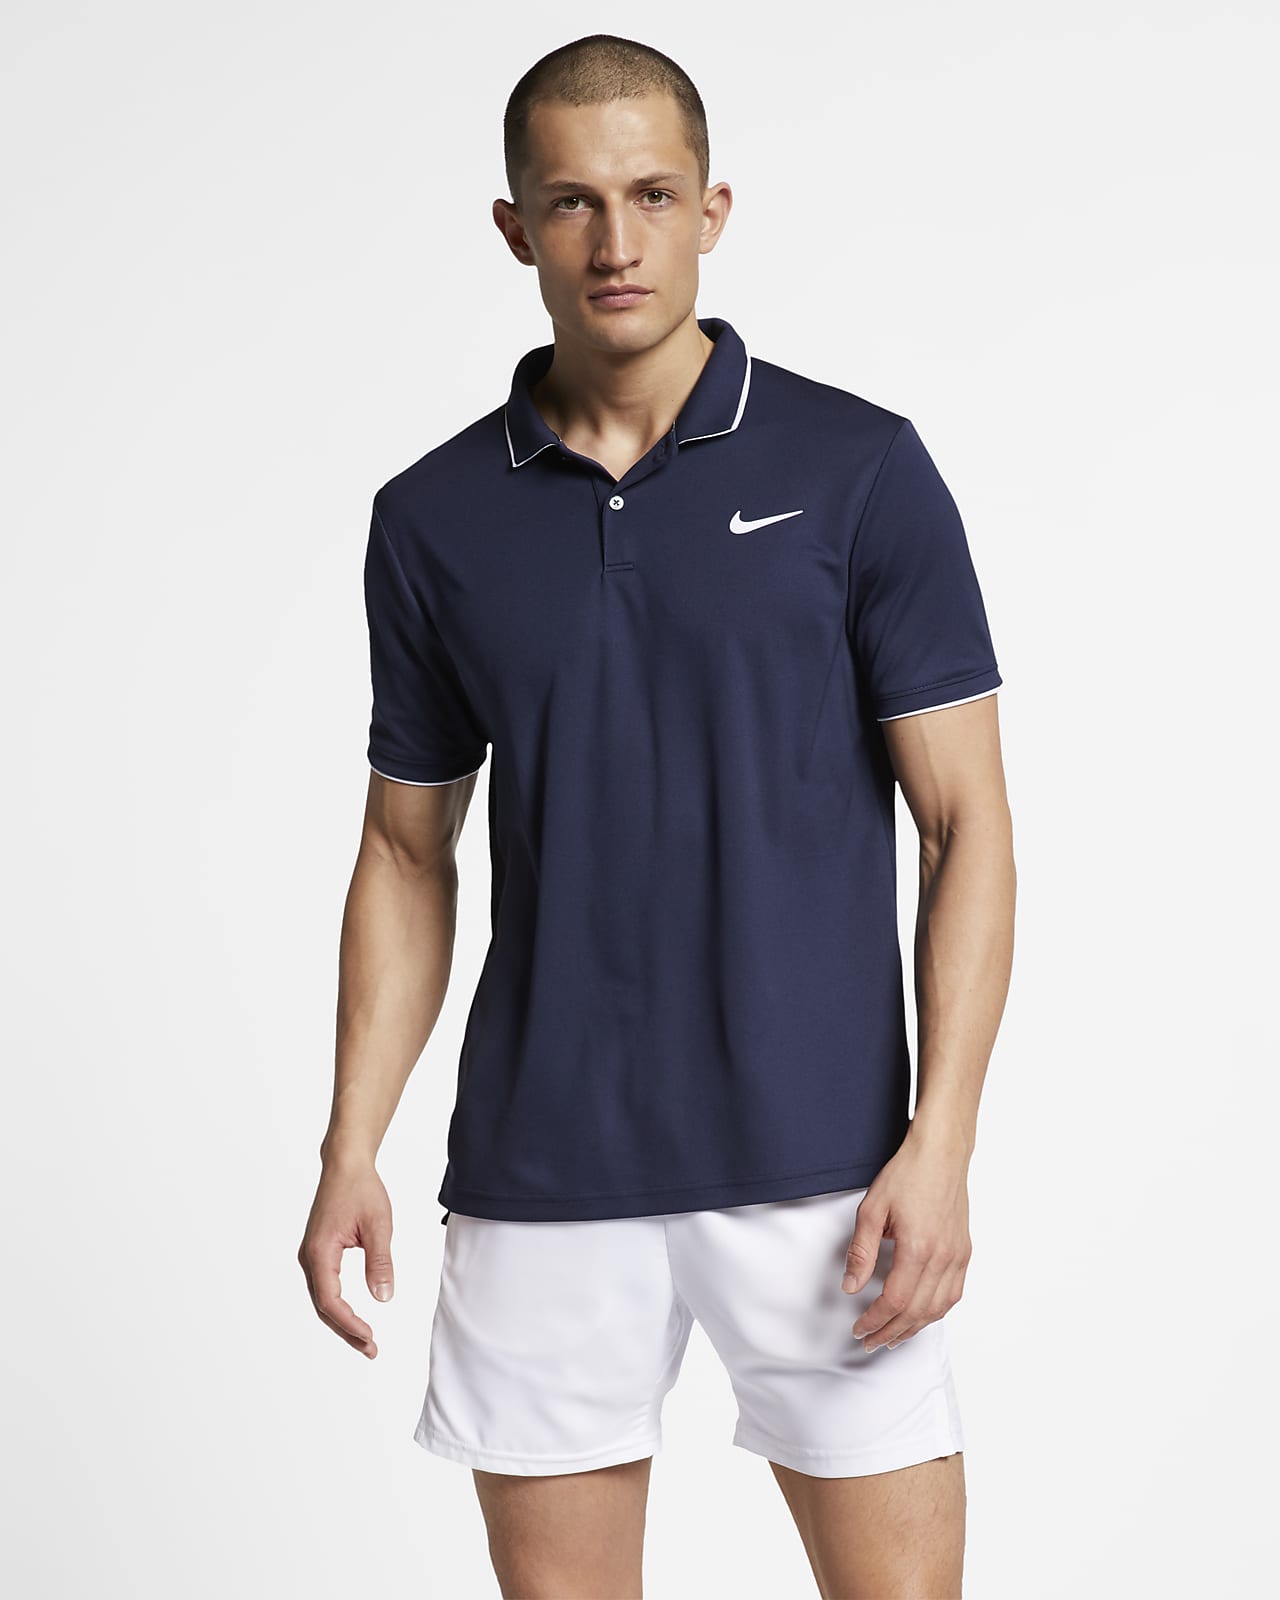 polo dry fit nike